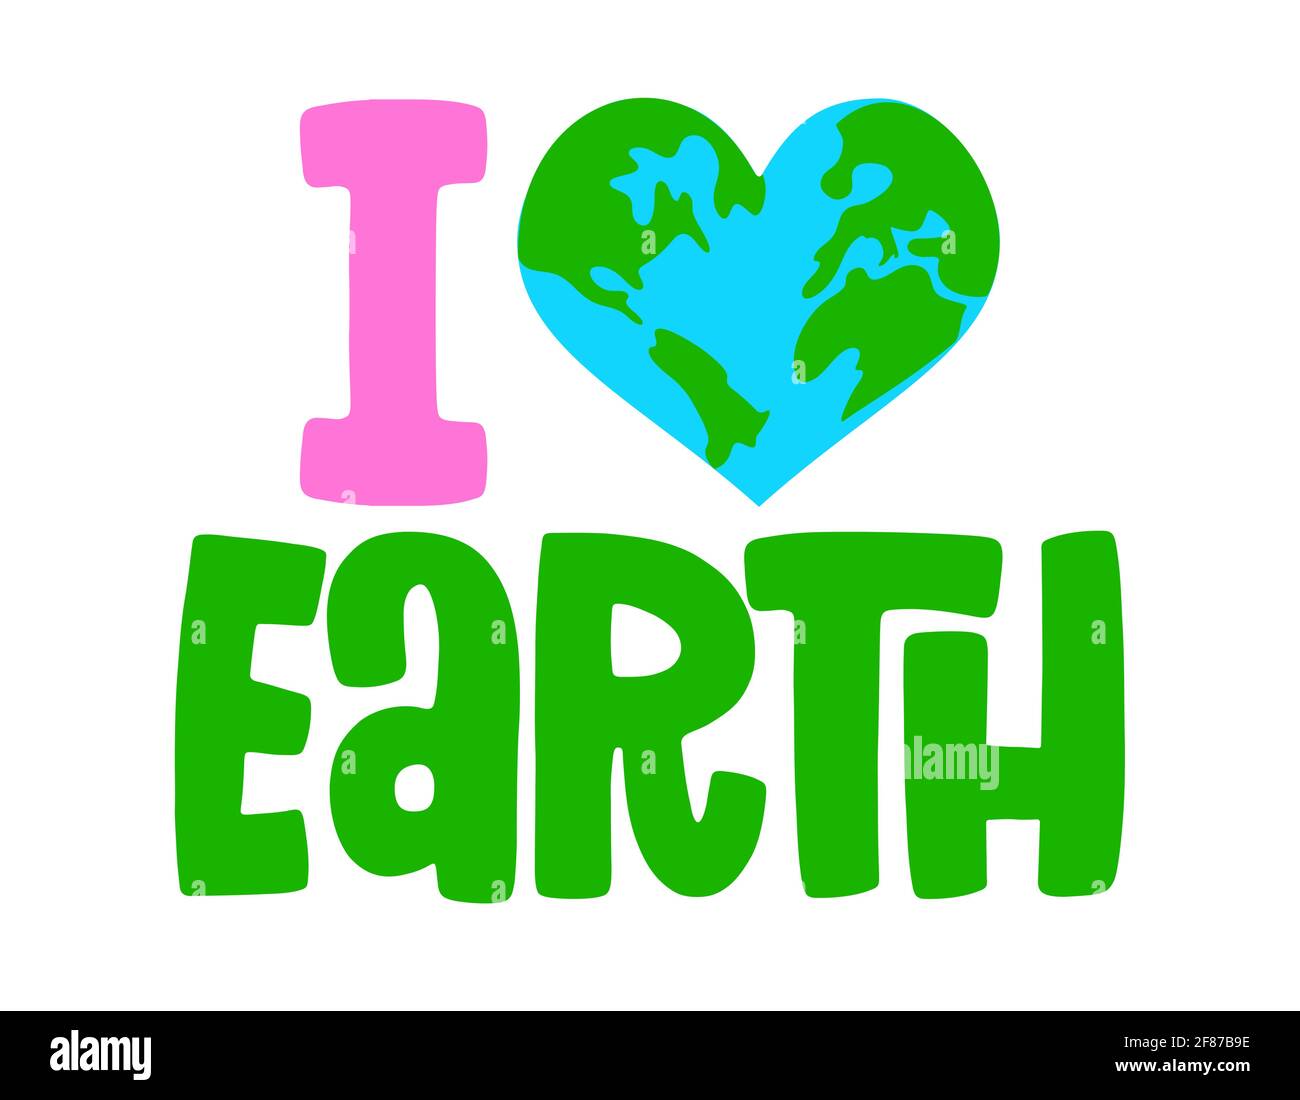 I Love Earth sticker - text quotes and planet earth drawing with eco friendly quote. Lettering poster or t-shirt textile graphic design. environmental Stock Vector